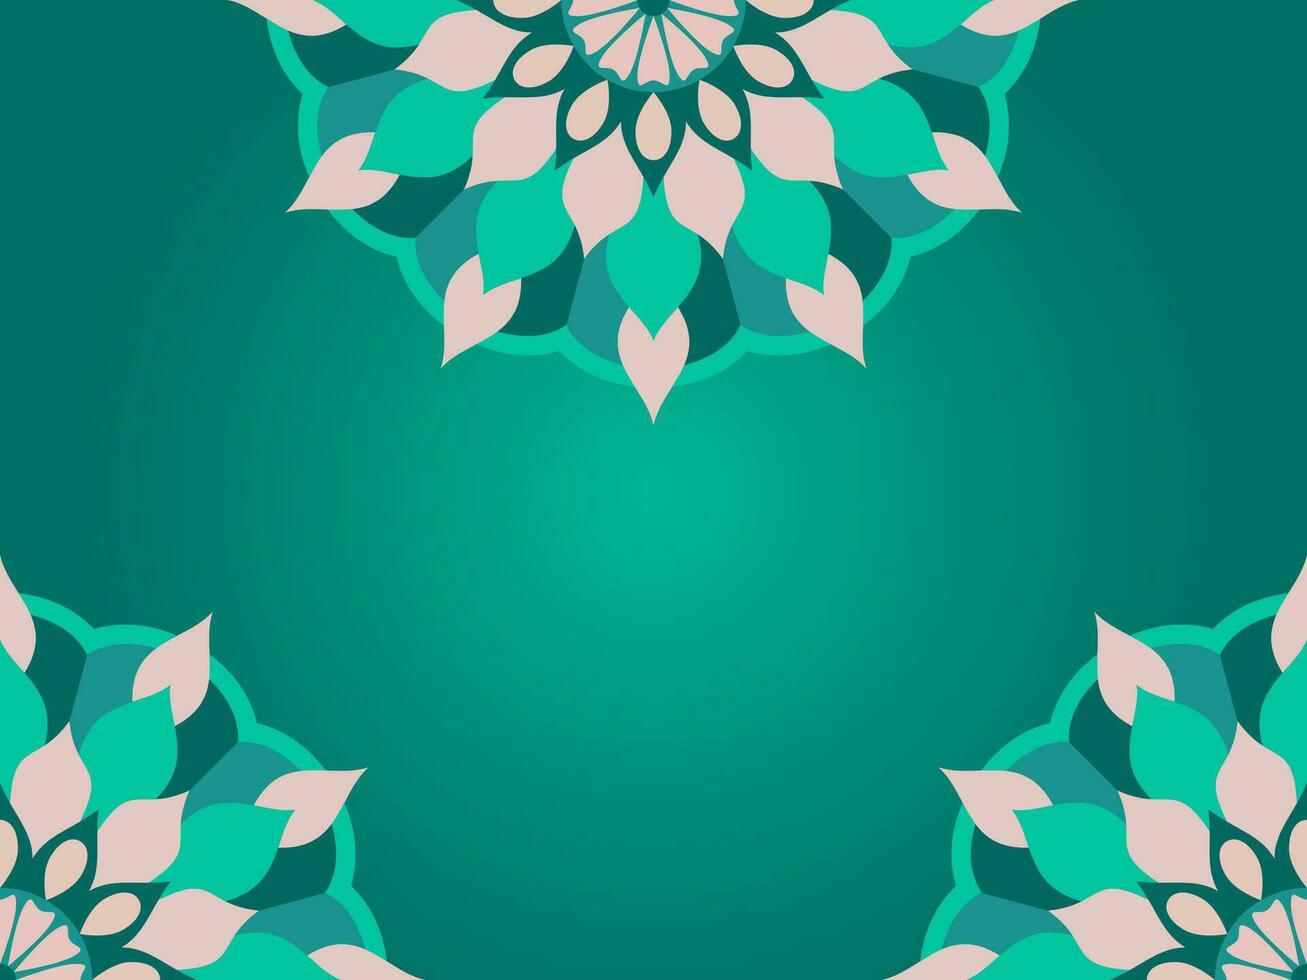 The Less Stress Mandala Background for Adults Volume vector